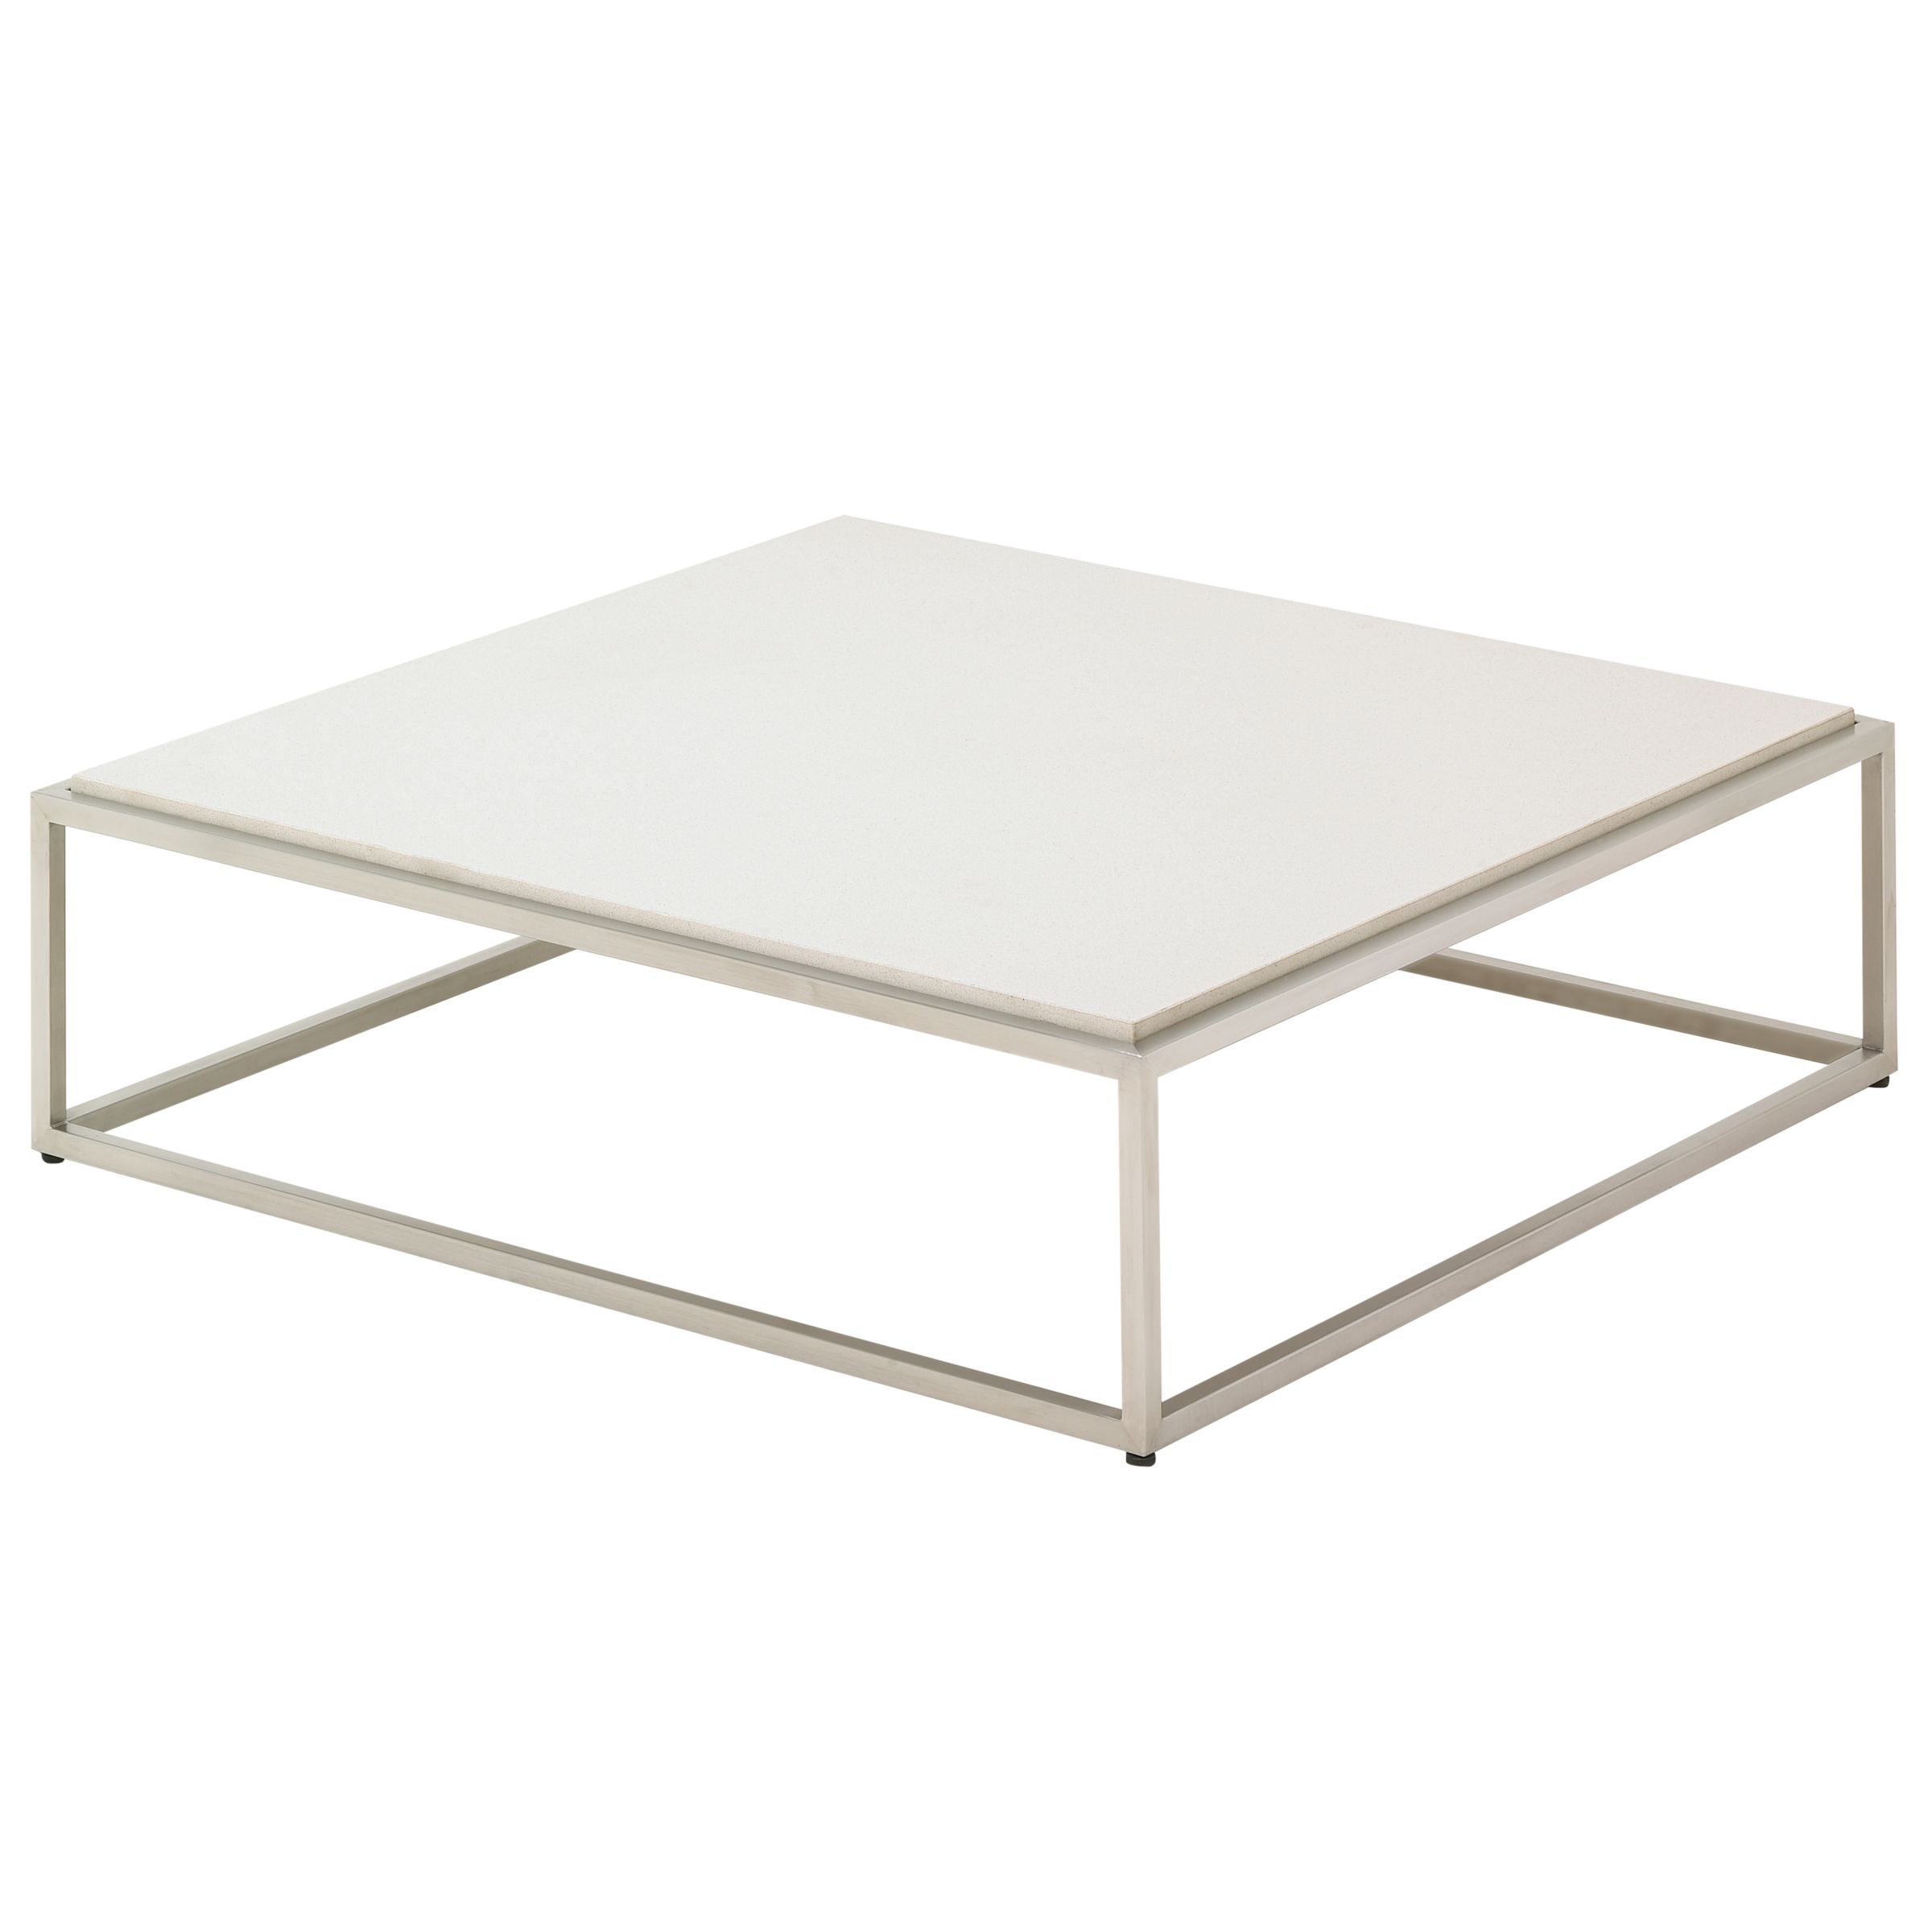 Cloud Square Outdoor Coffee Table,